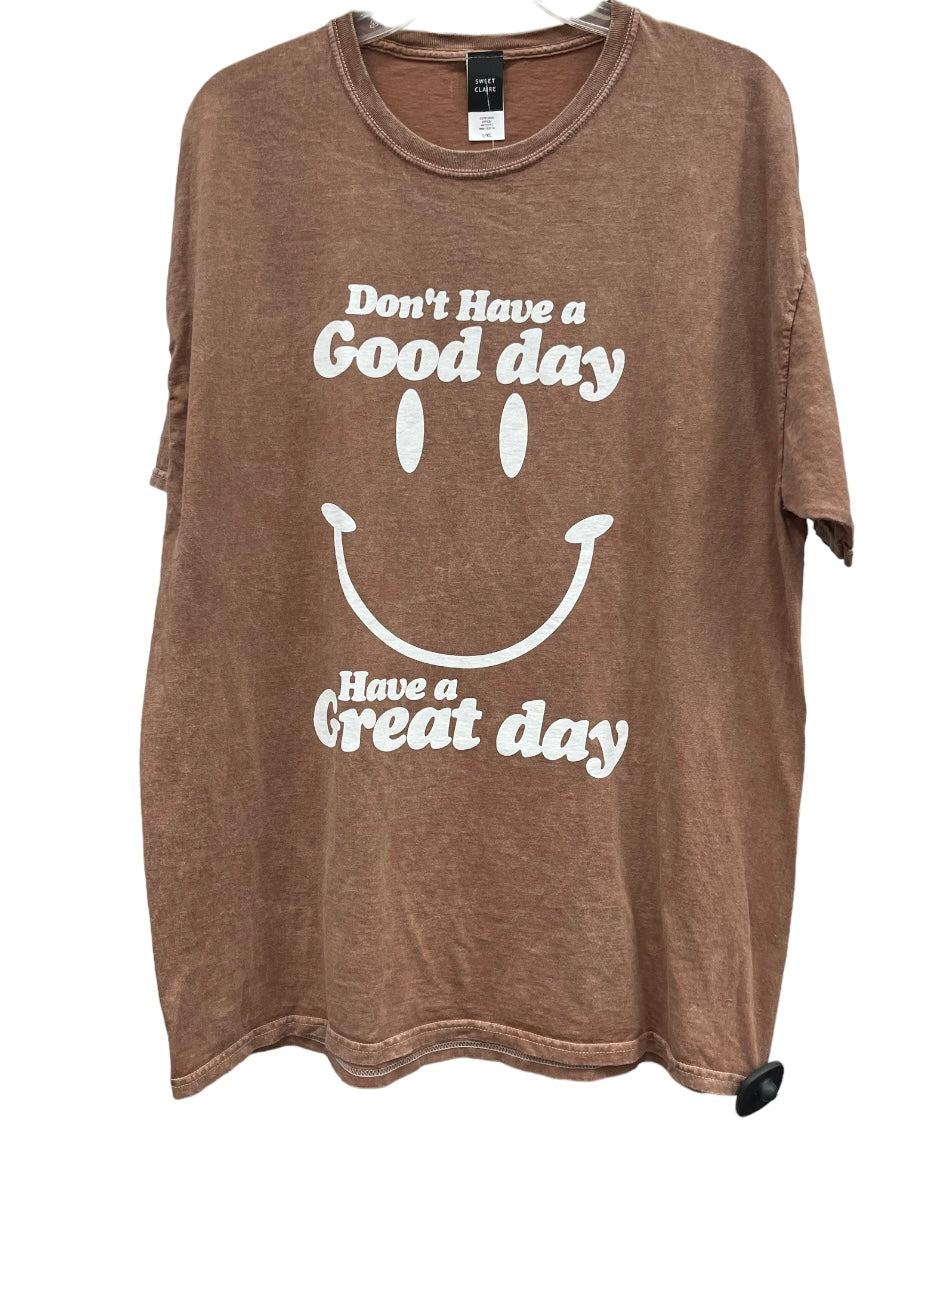 Have a great day shirt